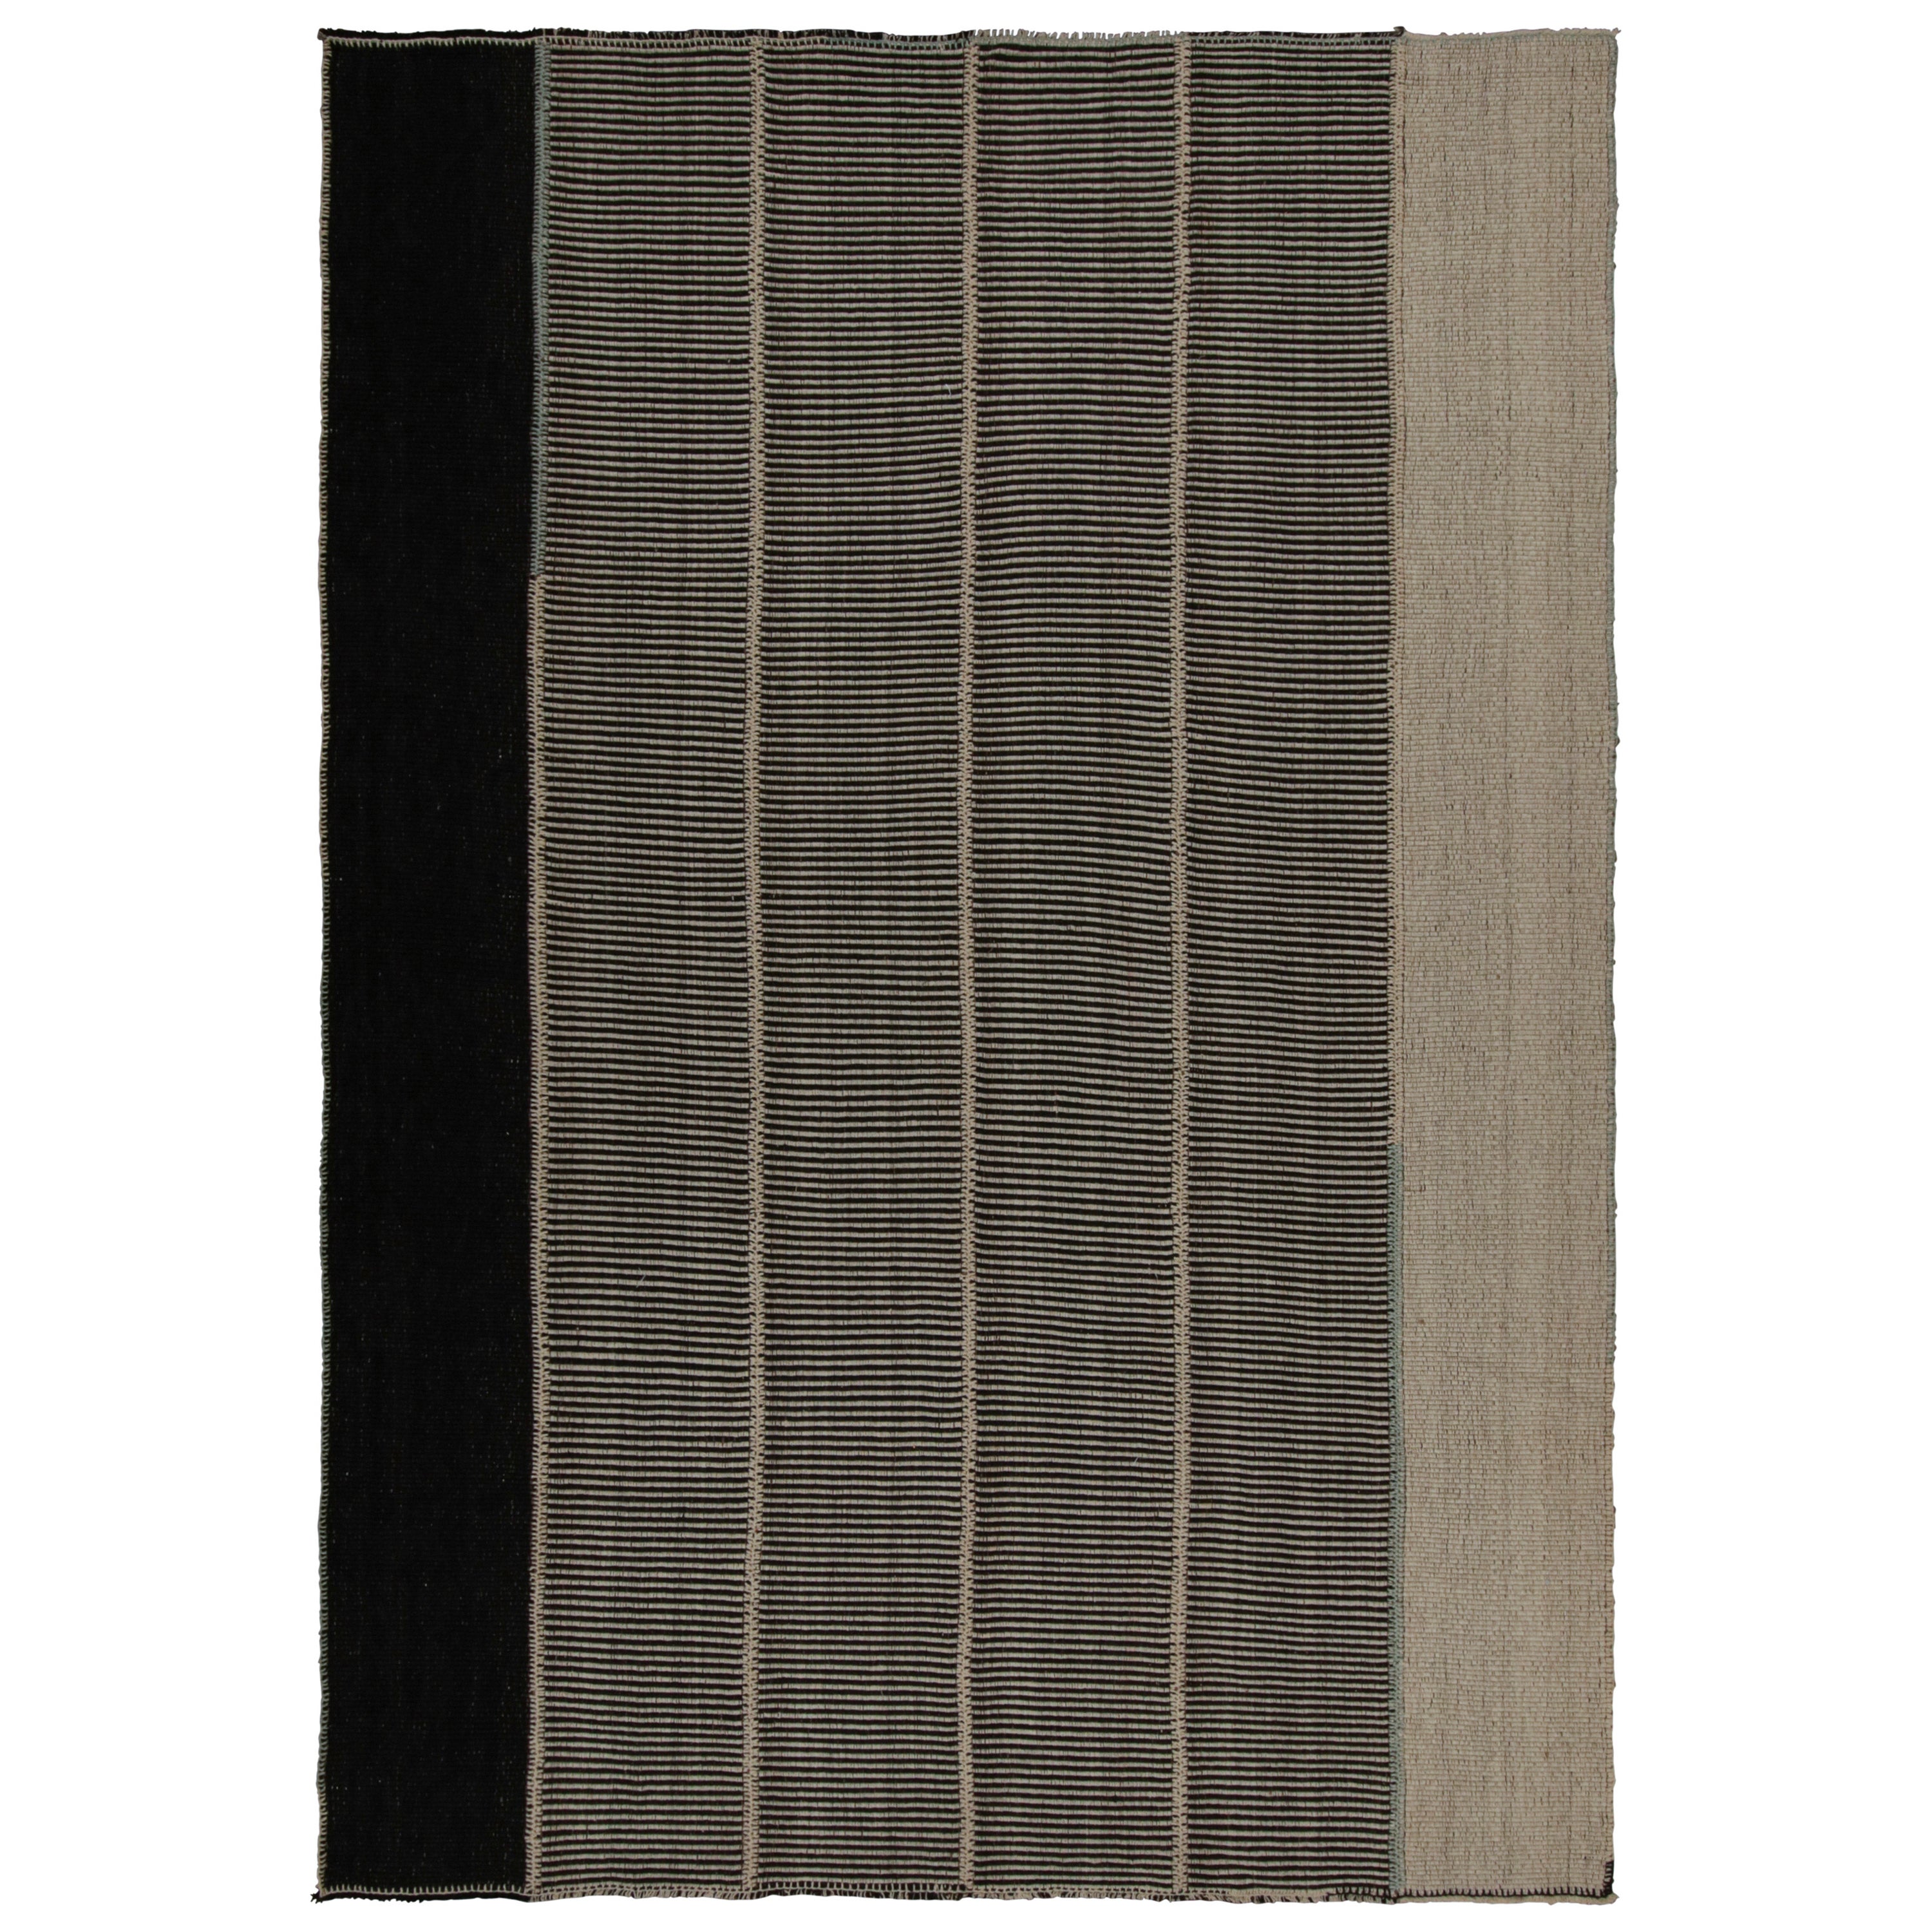 Rug & Kilim’s Contemporary Kilim, in Black and Beige/brown Tones For Sale